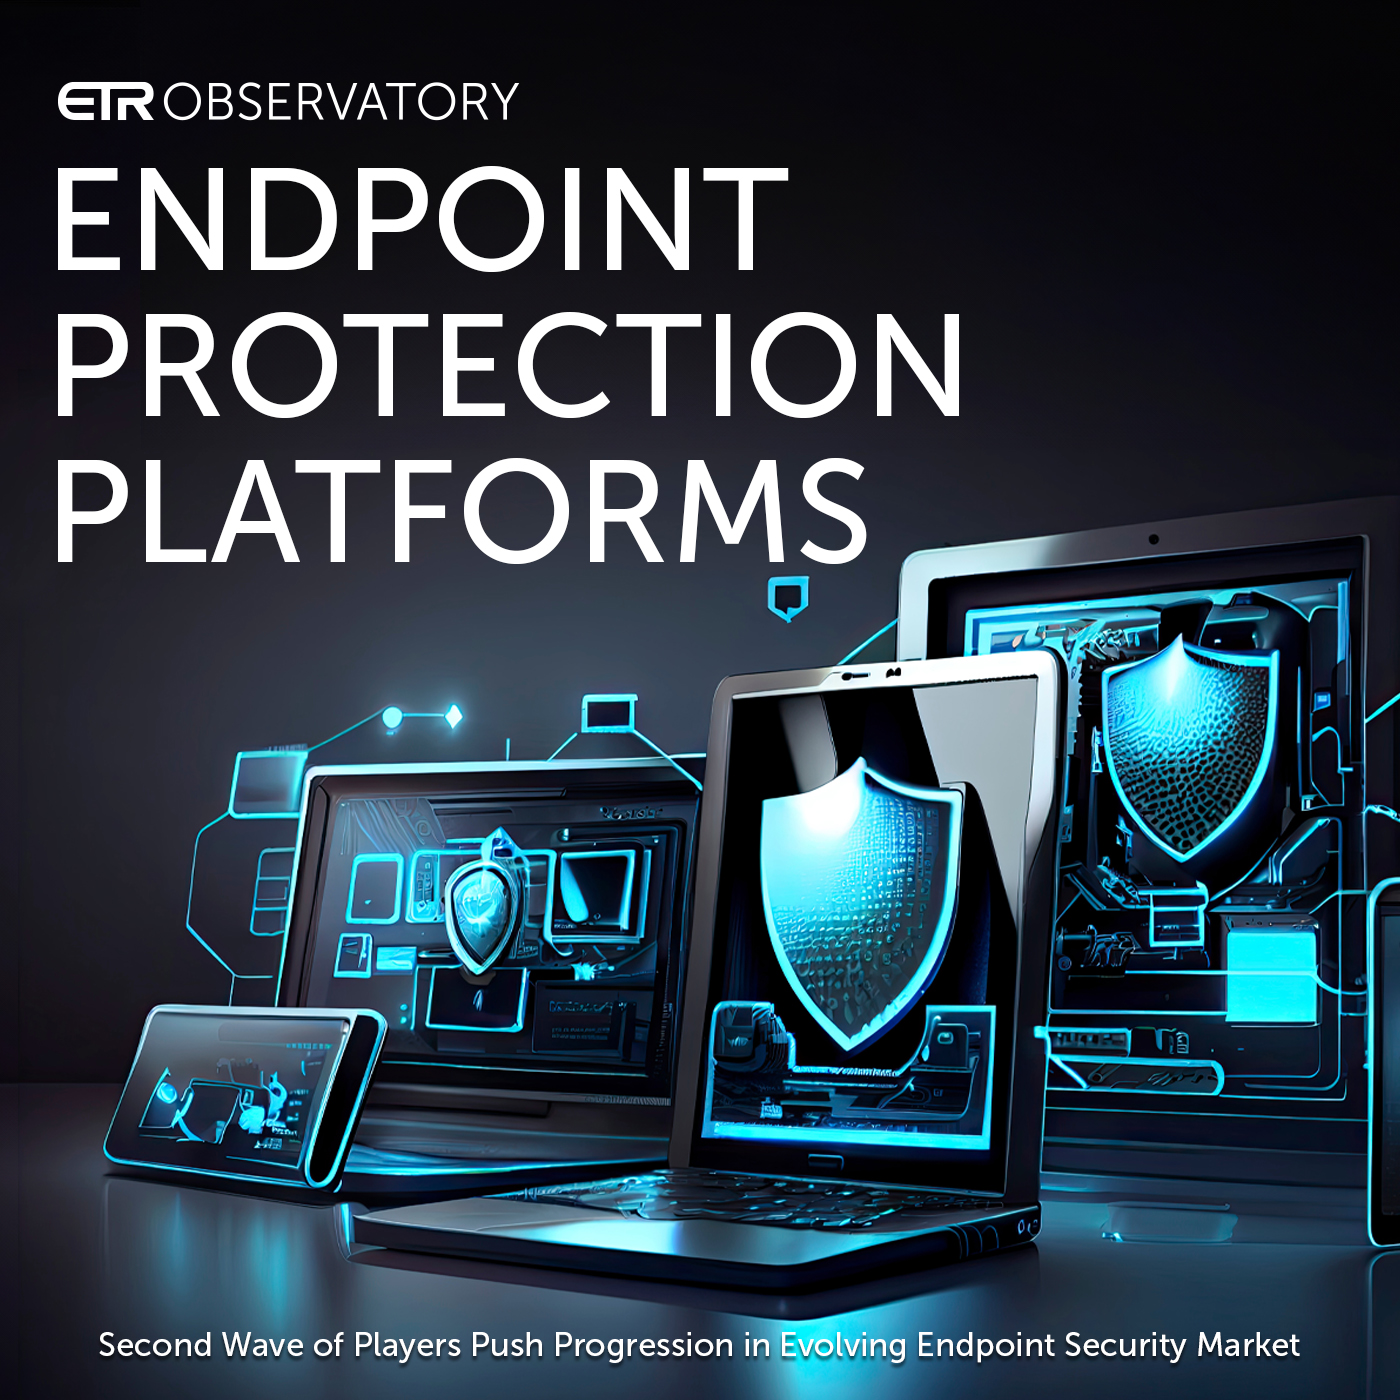 Endpoint Protection Platforms headlines